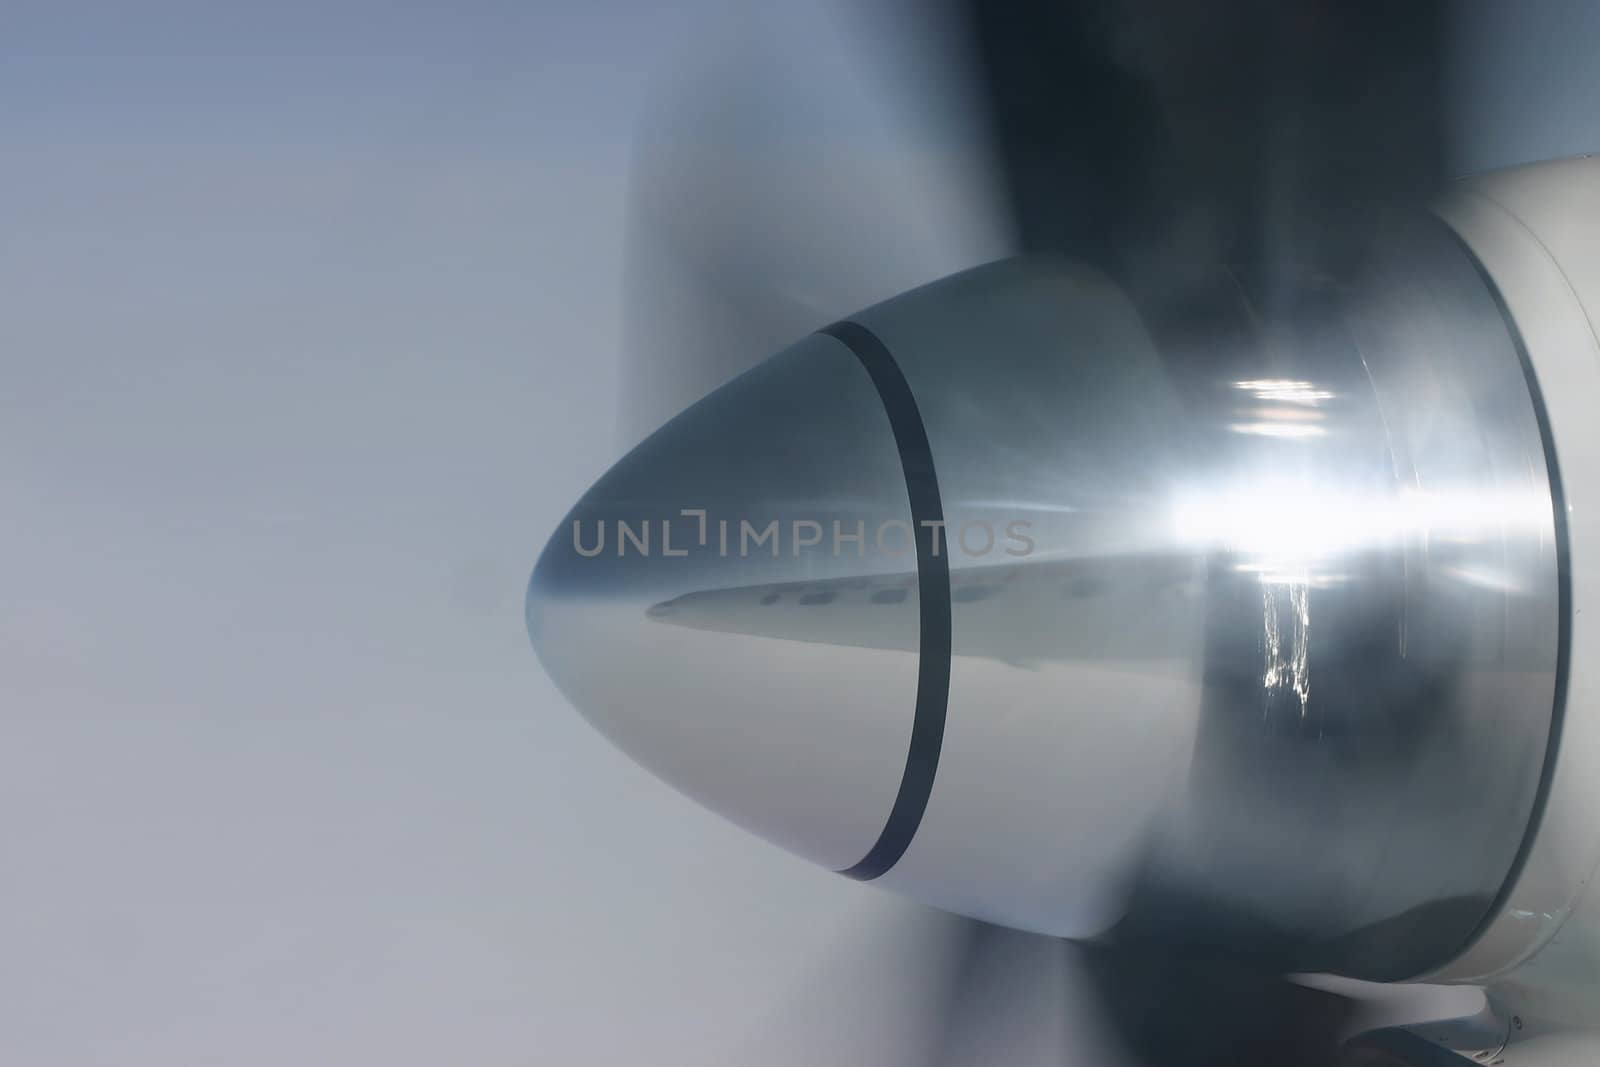 Spinning propeller with a reflection of the airplanes fuselage in the propeller cone.